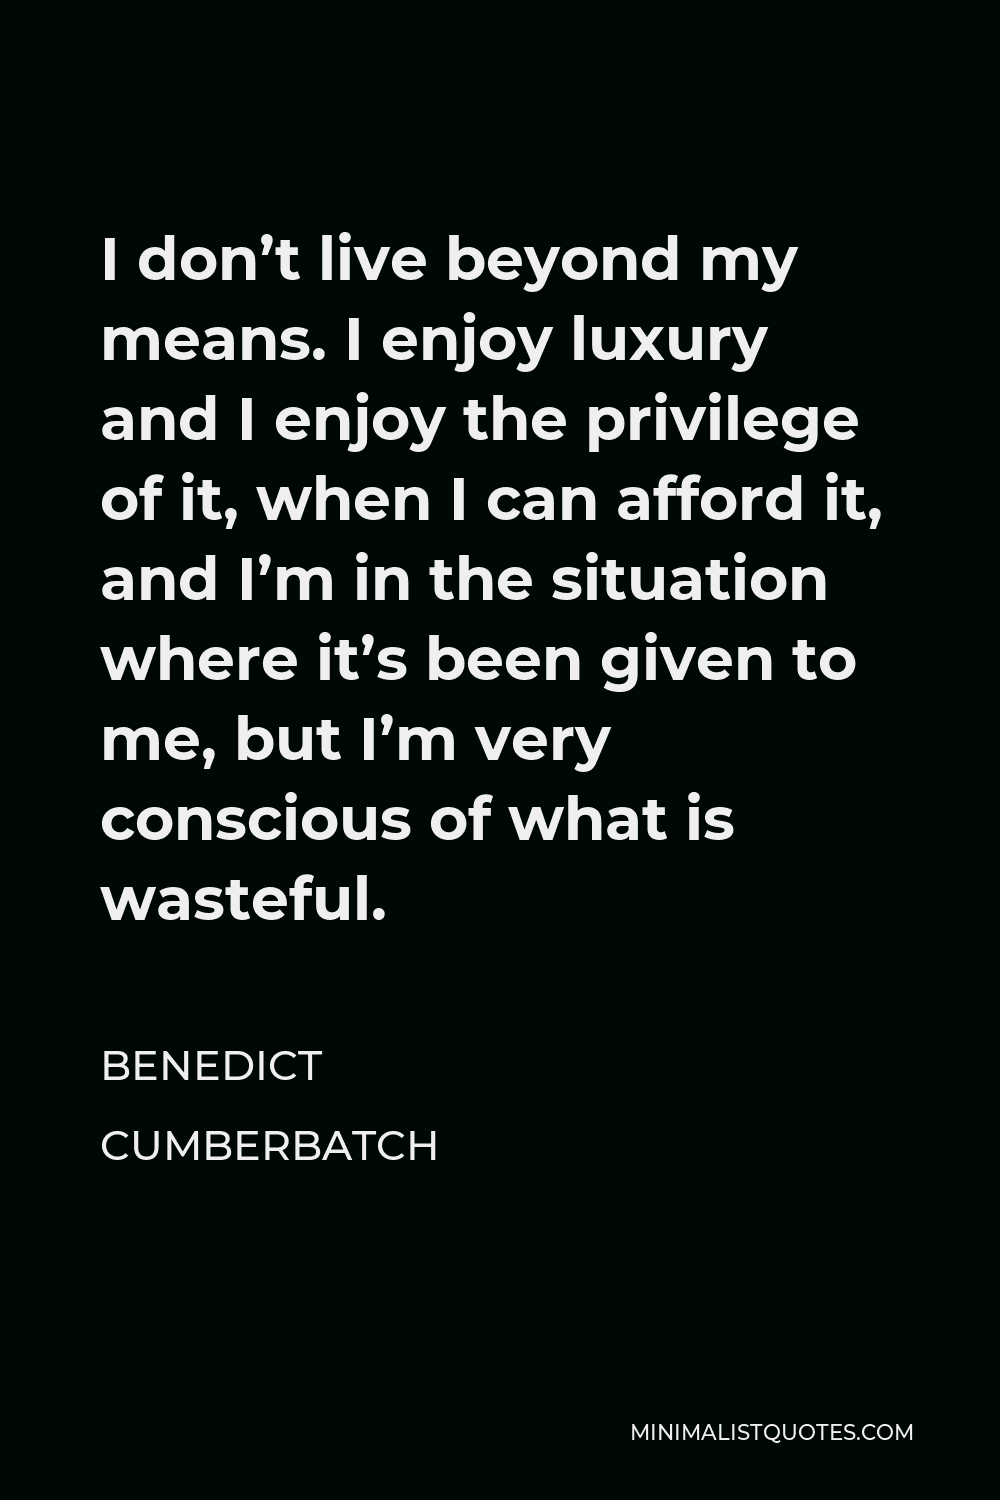 Benedict Cumberbatch Quote - I don’t live beyond my means. I enjoy luxury and I enjoy the privilege of it, when I can afford it, and I’m in the situation where it’s been given to me, but I’m very conscious of what is wasteful.